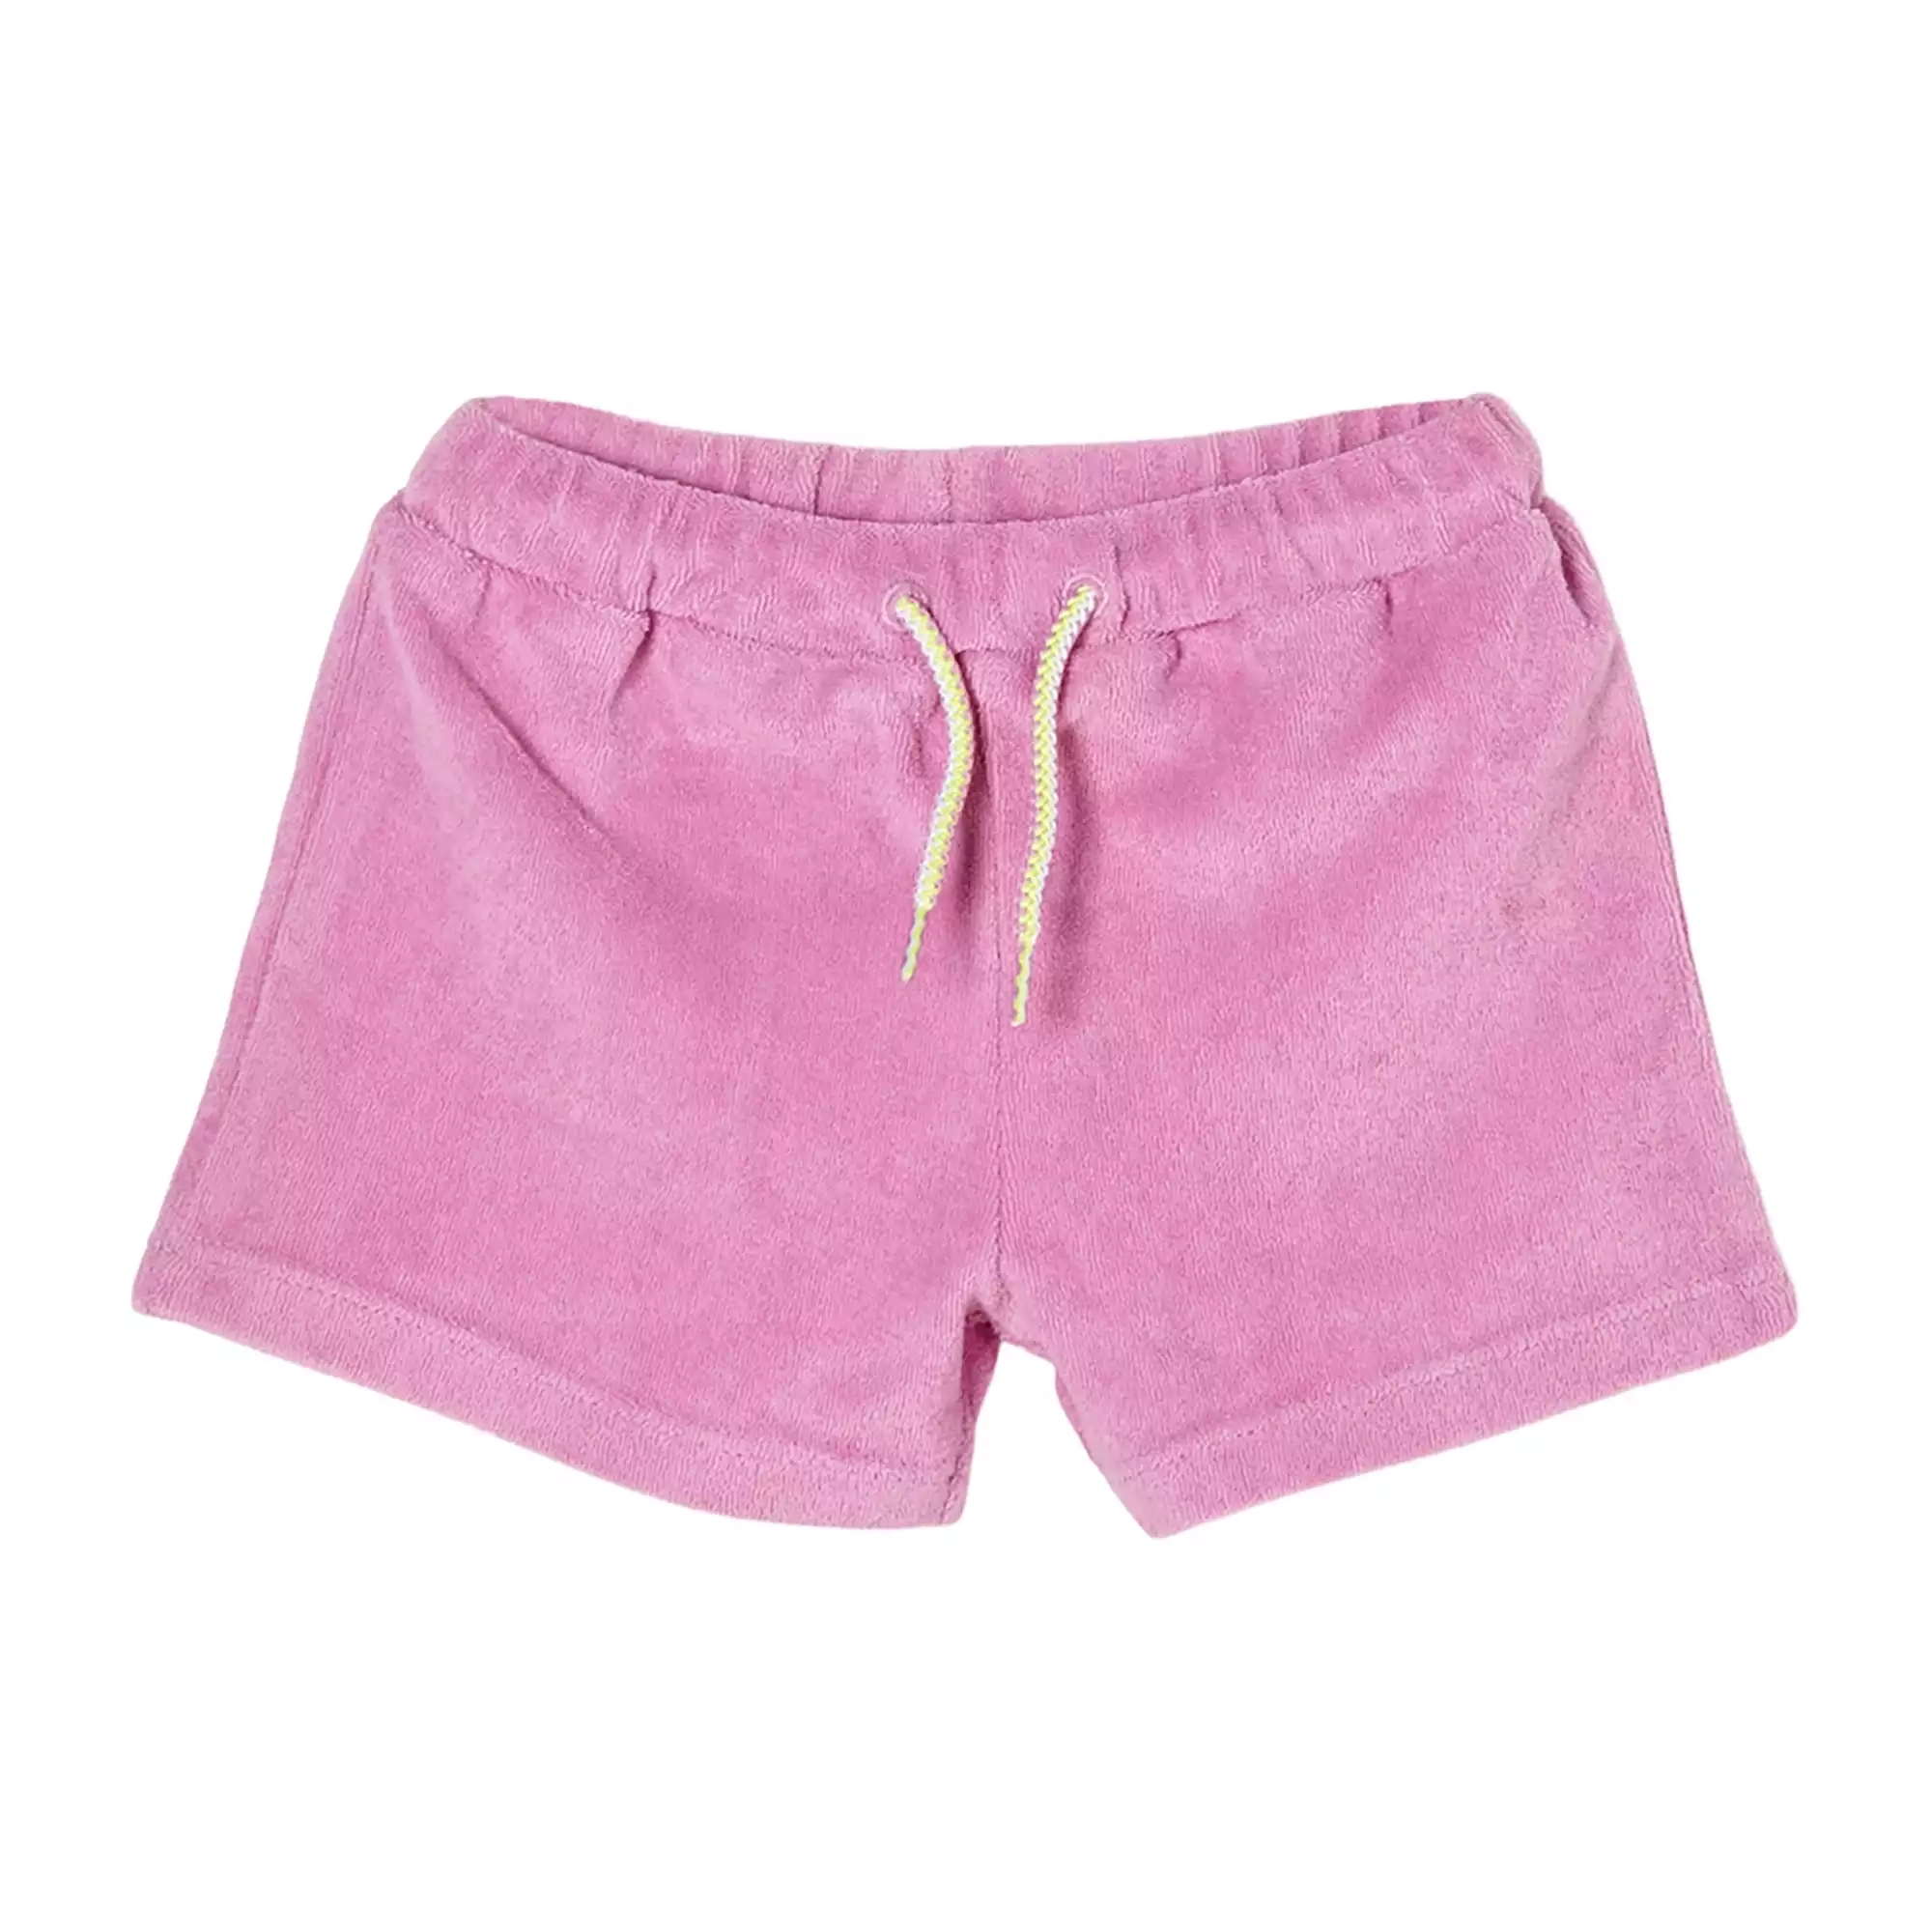 Frottee Shorts s.Oliver Pink M2000582542507 1